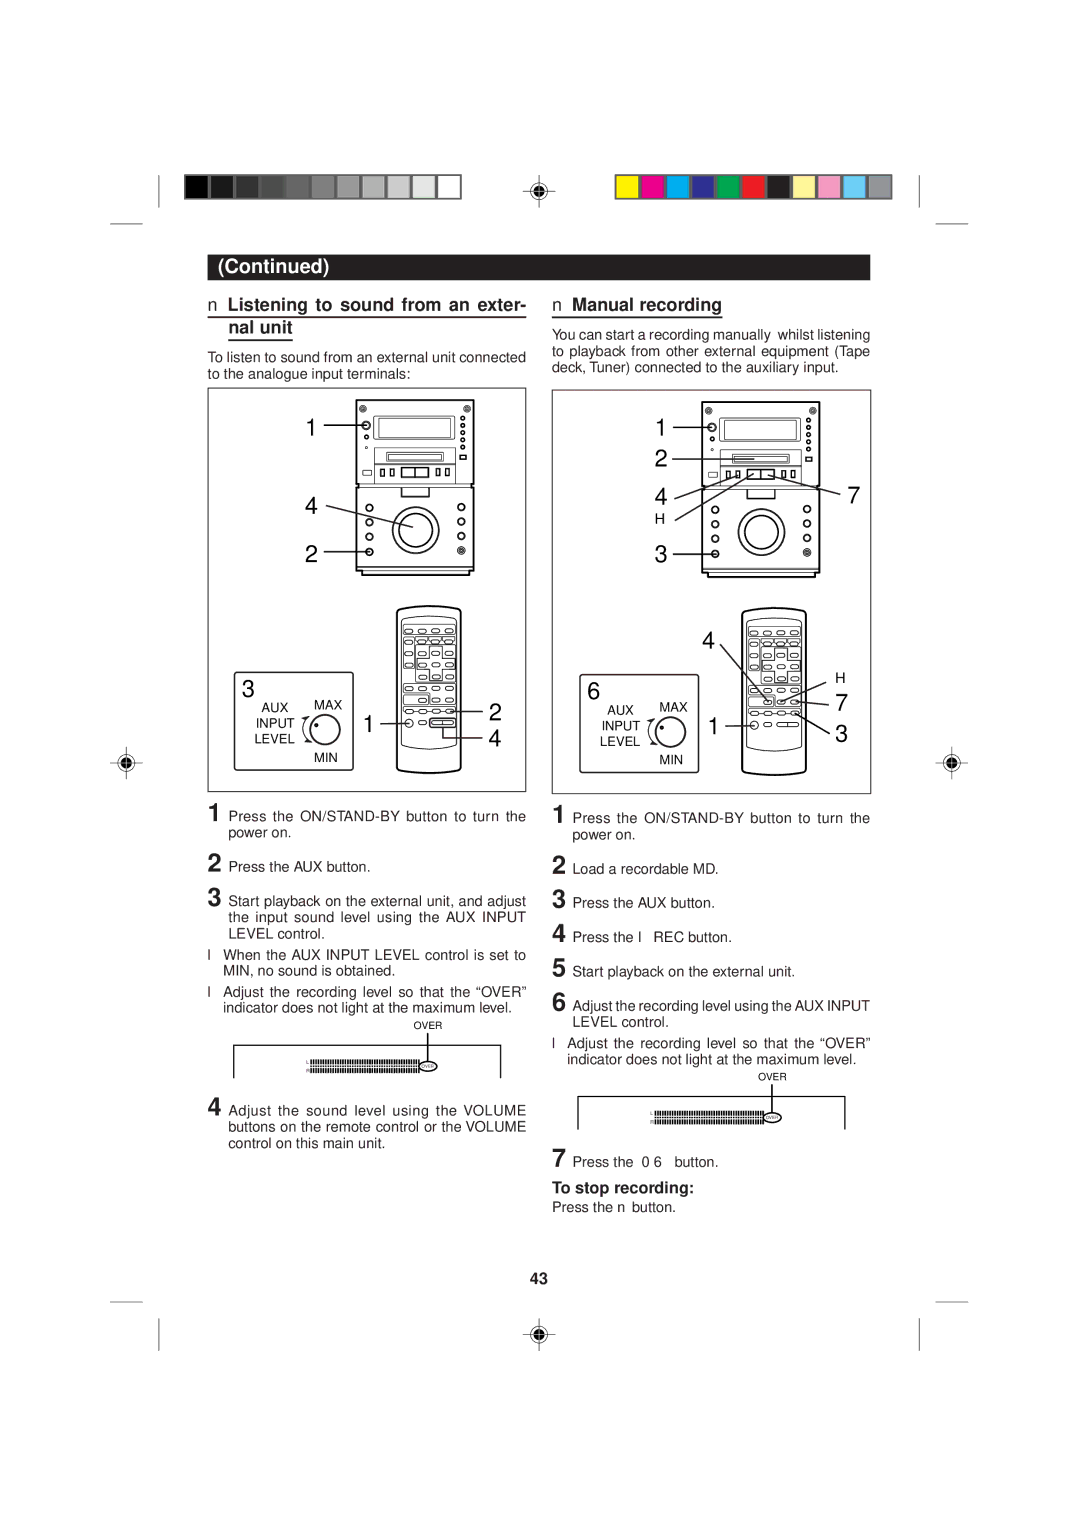 Sharp MD-M2H operation manual Listening to sound from an exter- nal unit, Manual recording 